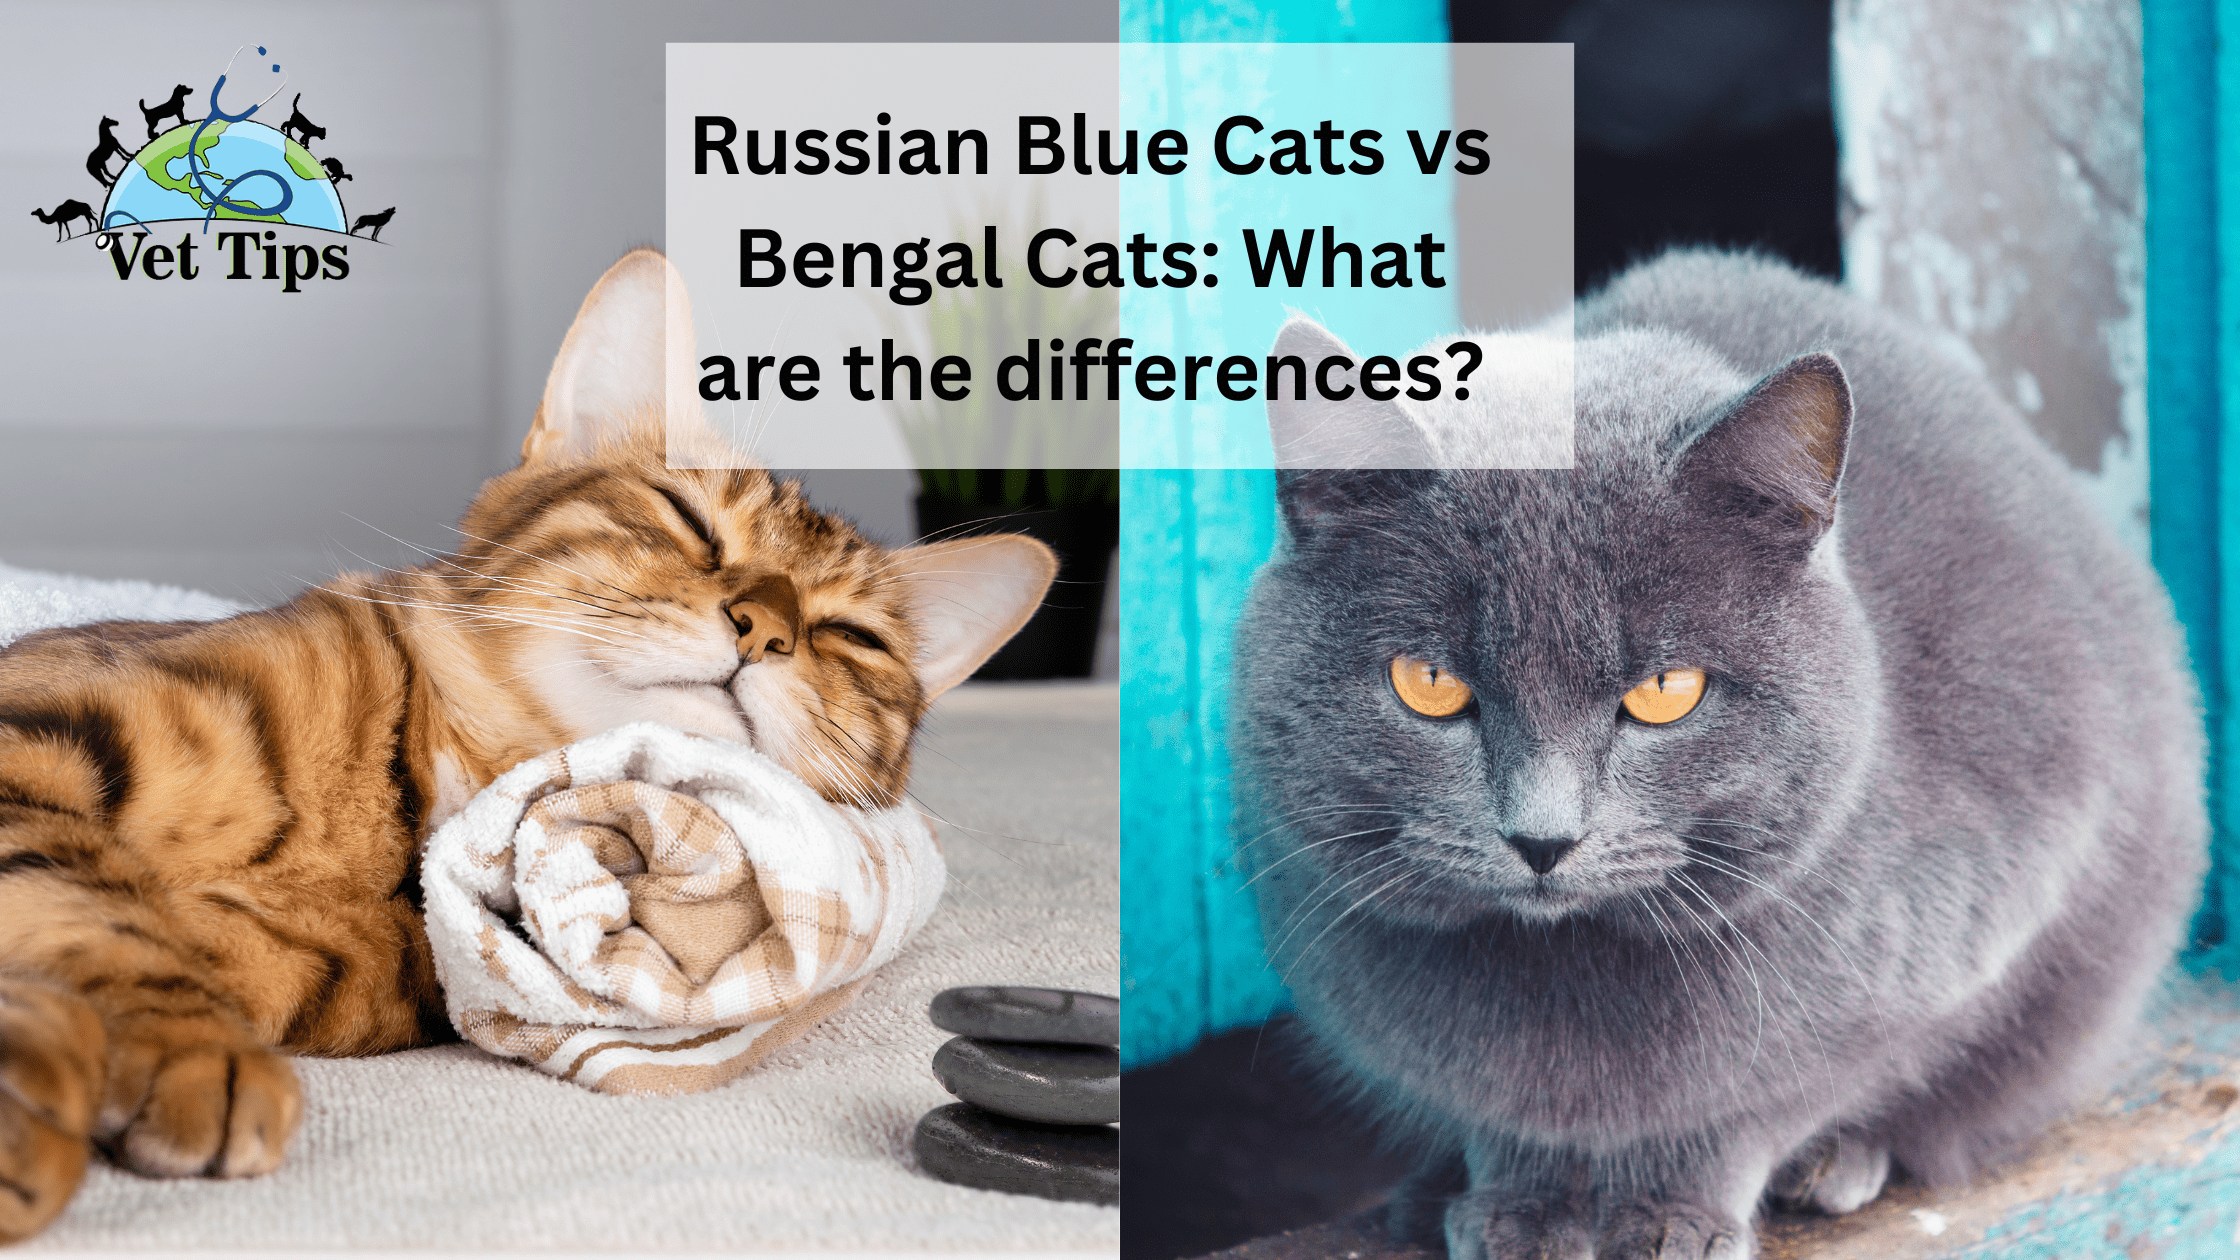 Russian Blue Cats vs Bengal Cats: What are the differences?